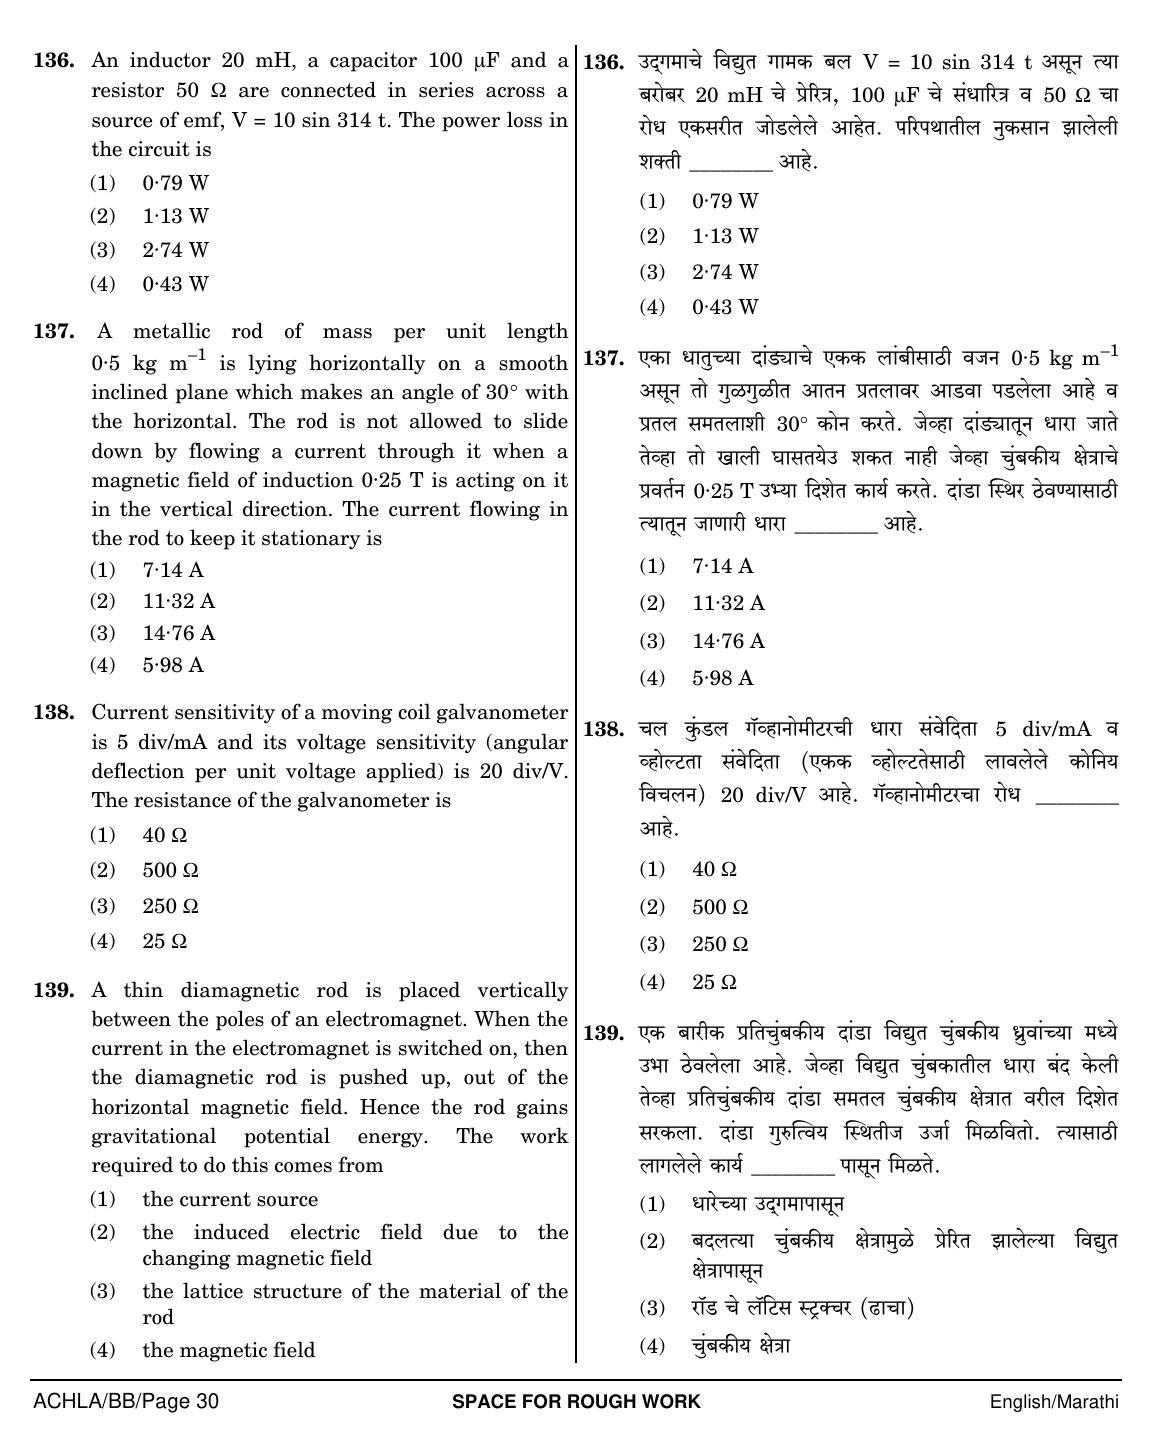 NEET Marathi BB 2018 Question Paper - Page 30